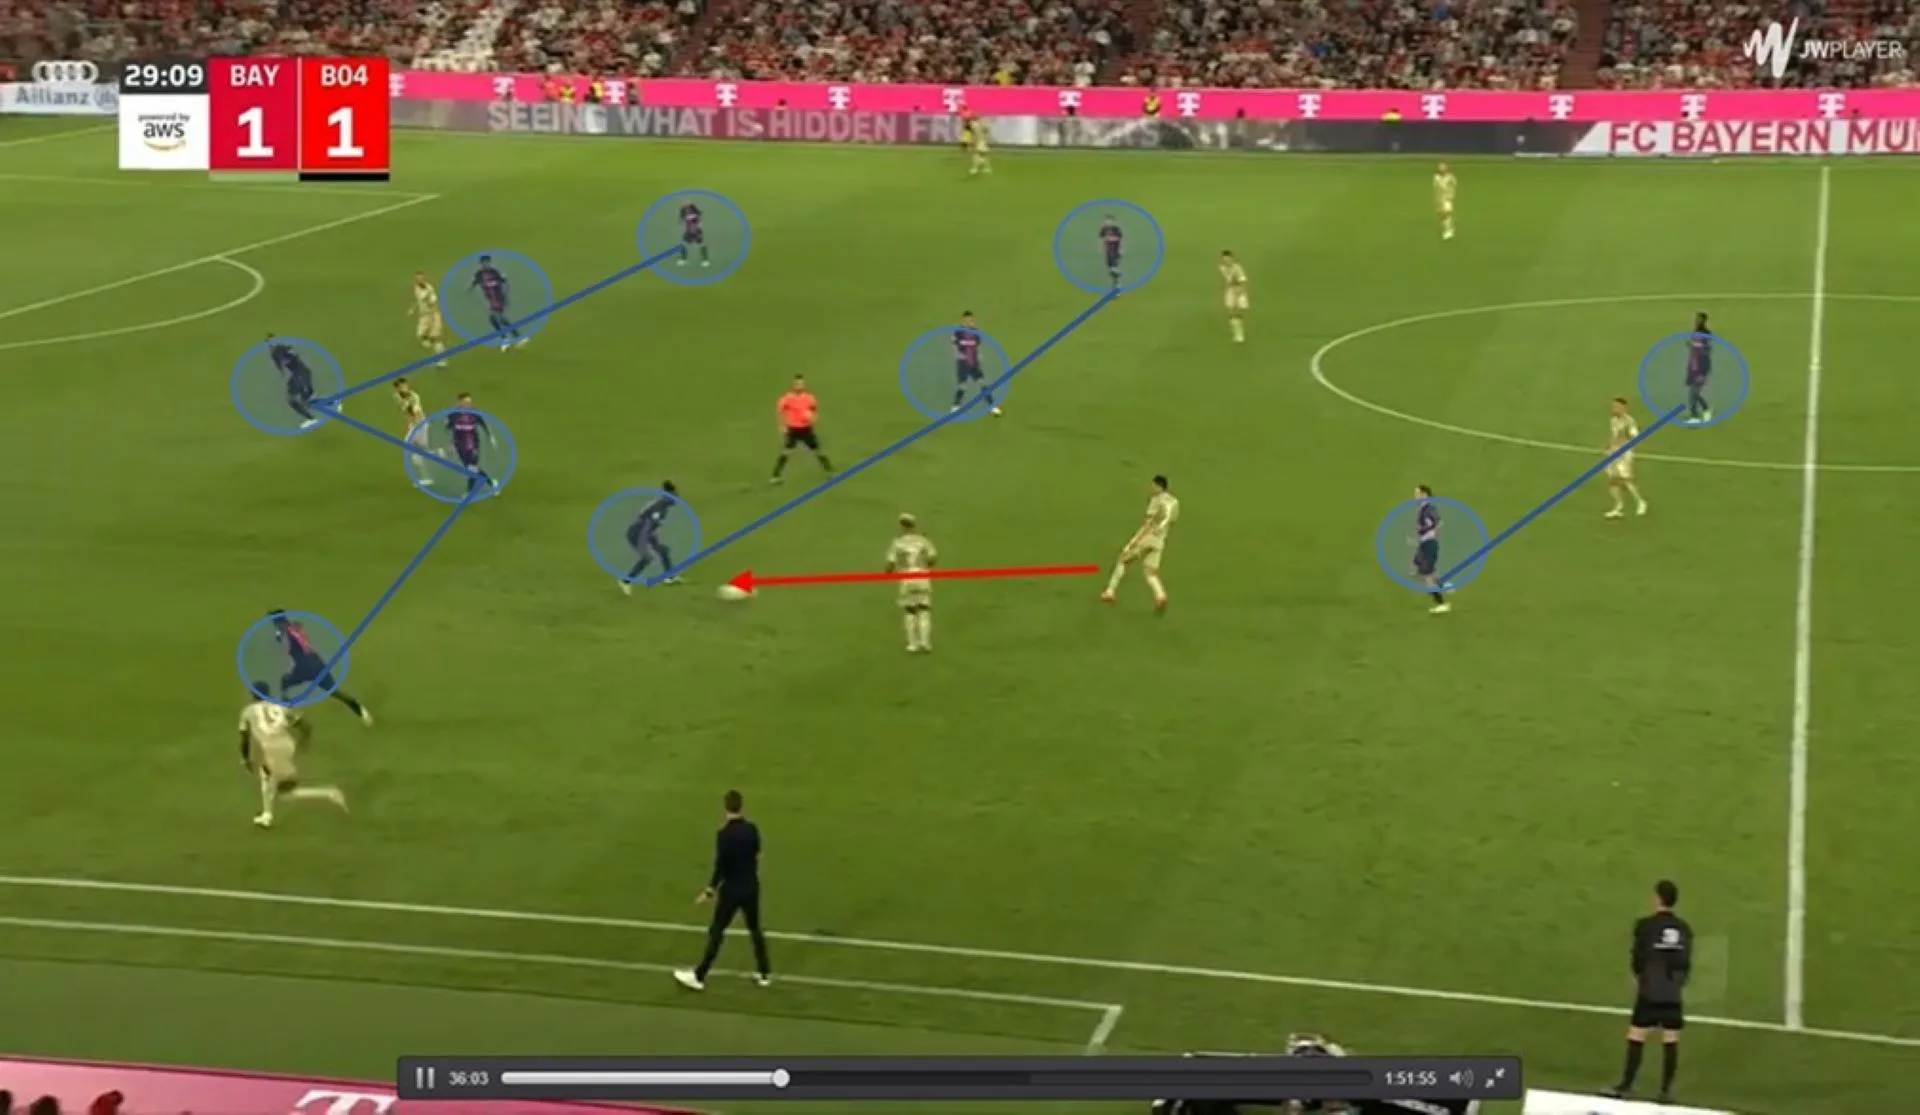 Defensive Structure made by Xabi Alonso